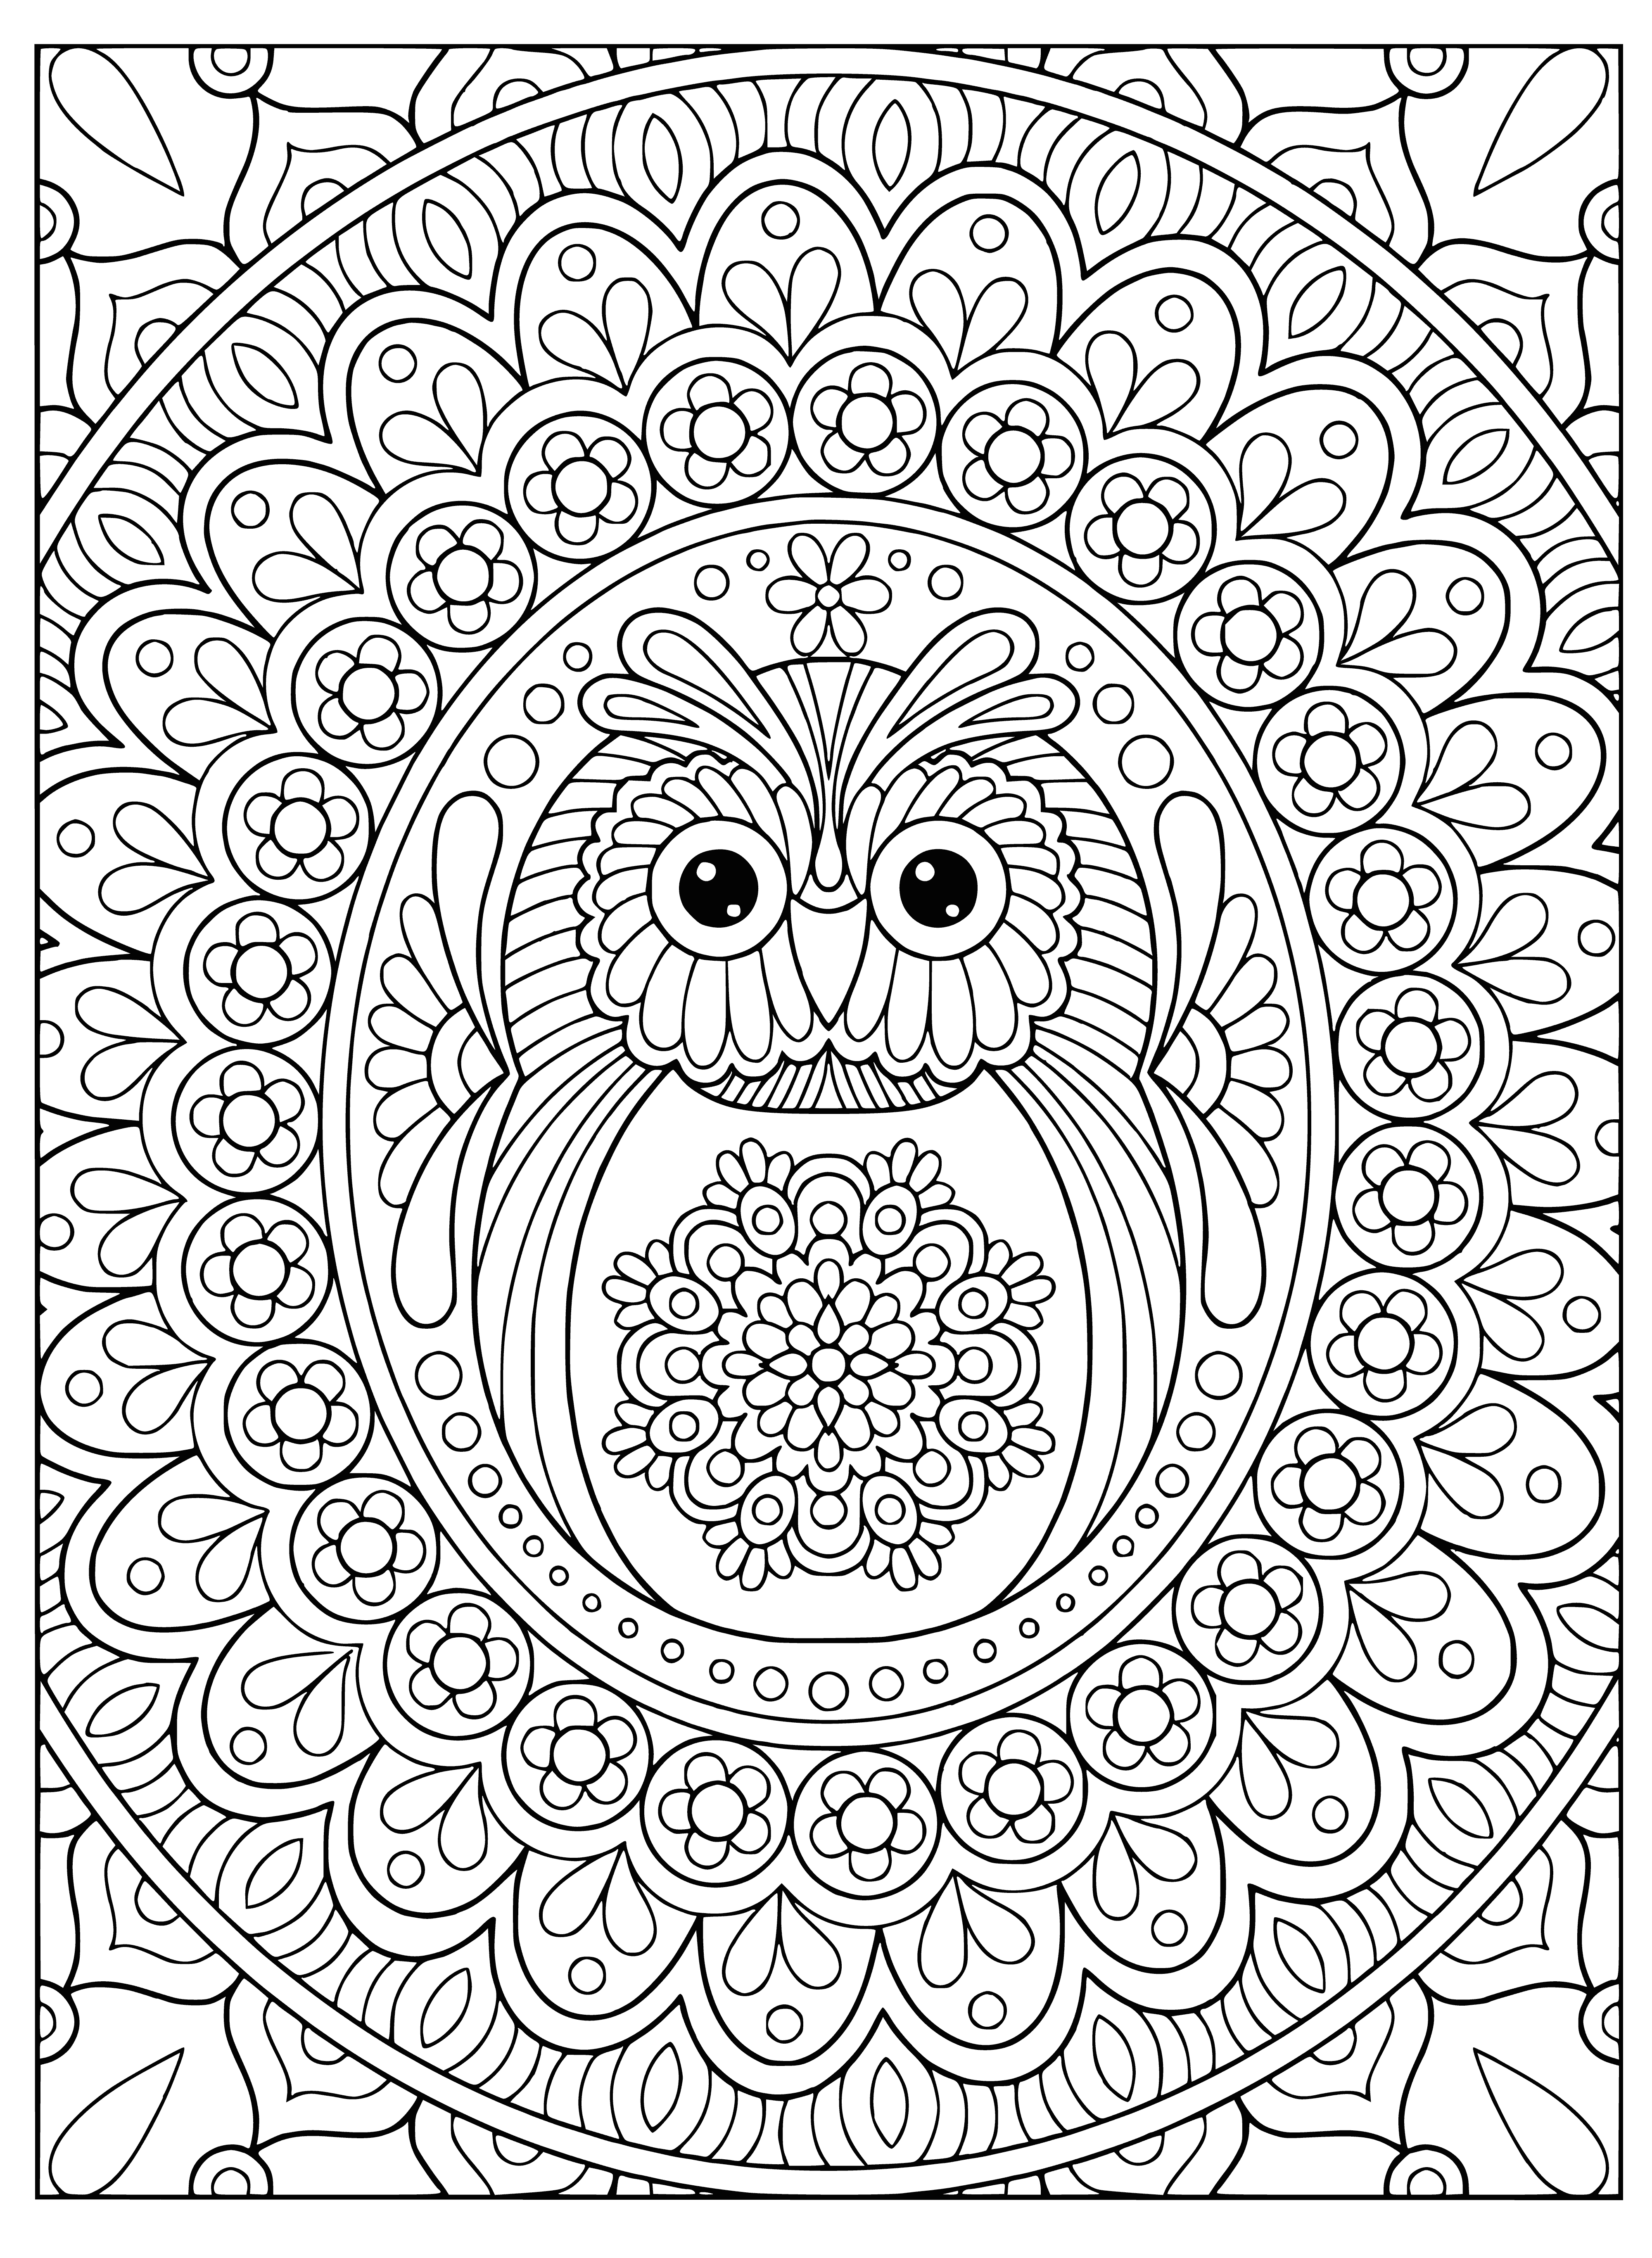 coloring page: A wise owl gazes atop a branch surrounded by stars, on a tranquil green background.